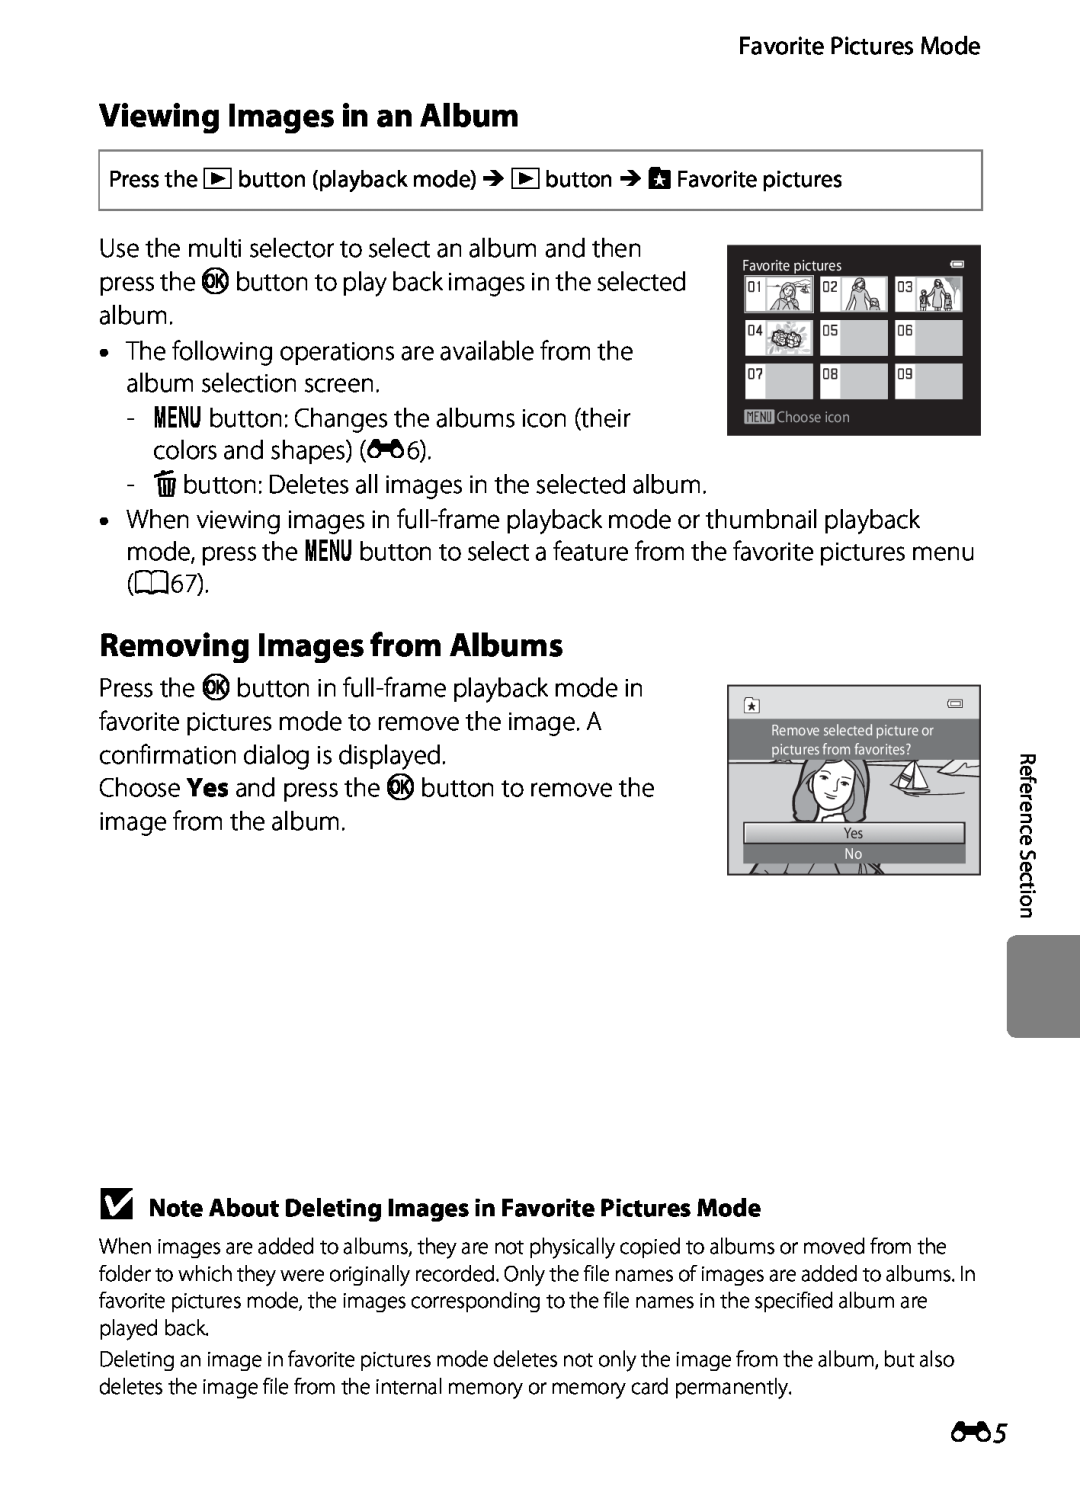 Nikon S2600 manual Viewing Images in an Album, Removing Images from Albums 